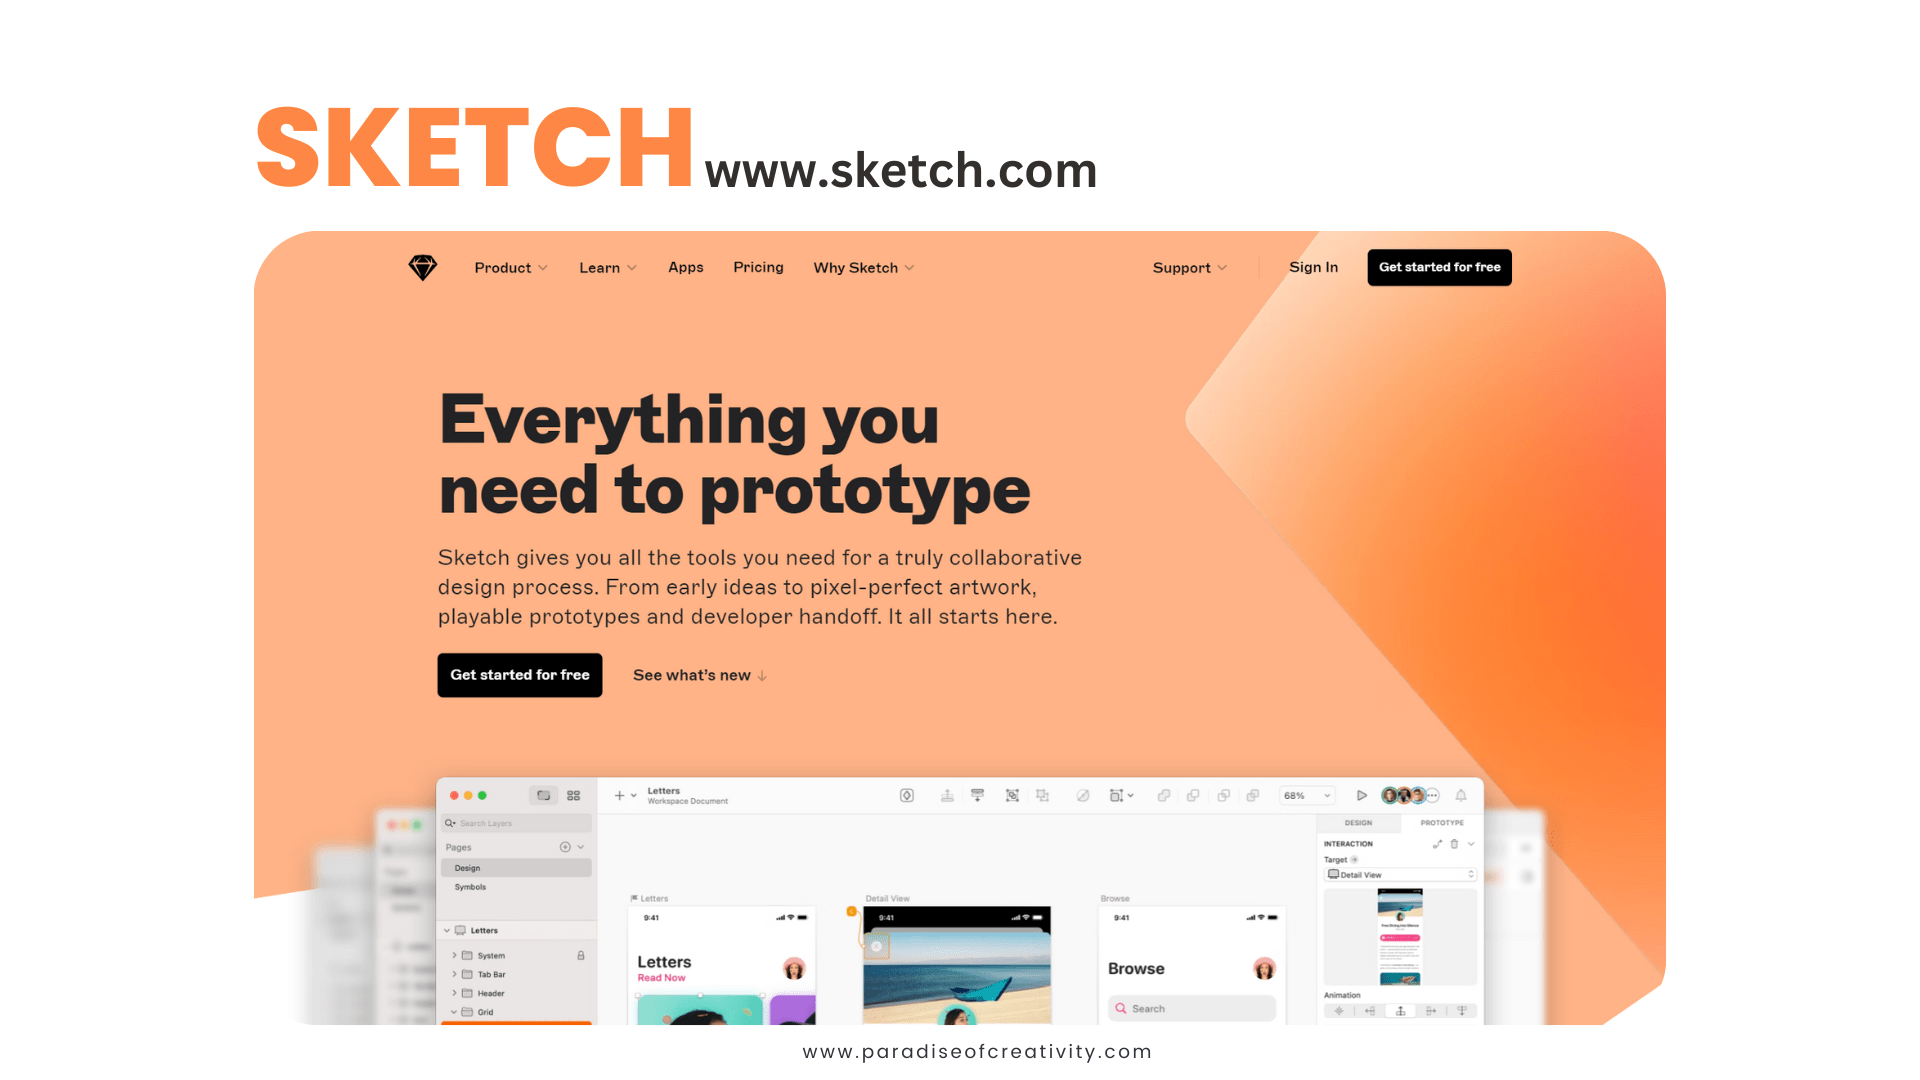 A popular tool for designing user interfaces, Sketch allows designers to create wireframes, mockups, and prototypes with a focus on vector graphics.